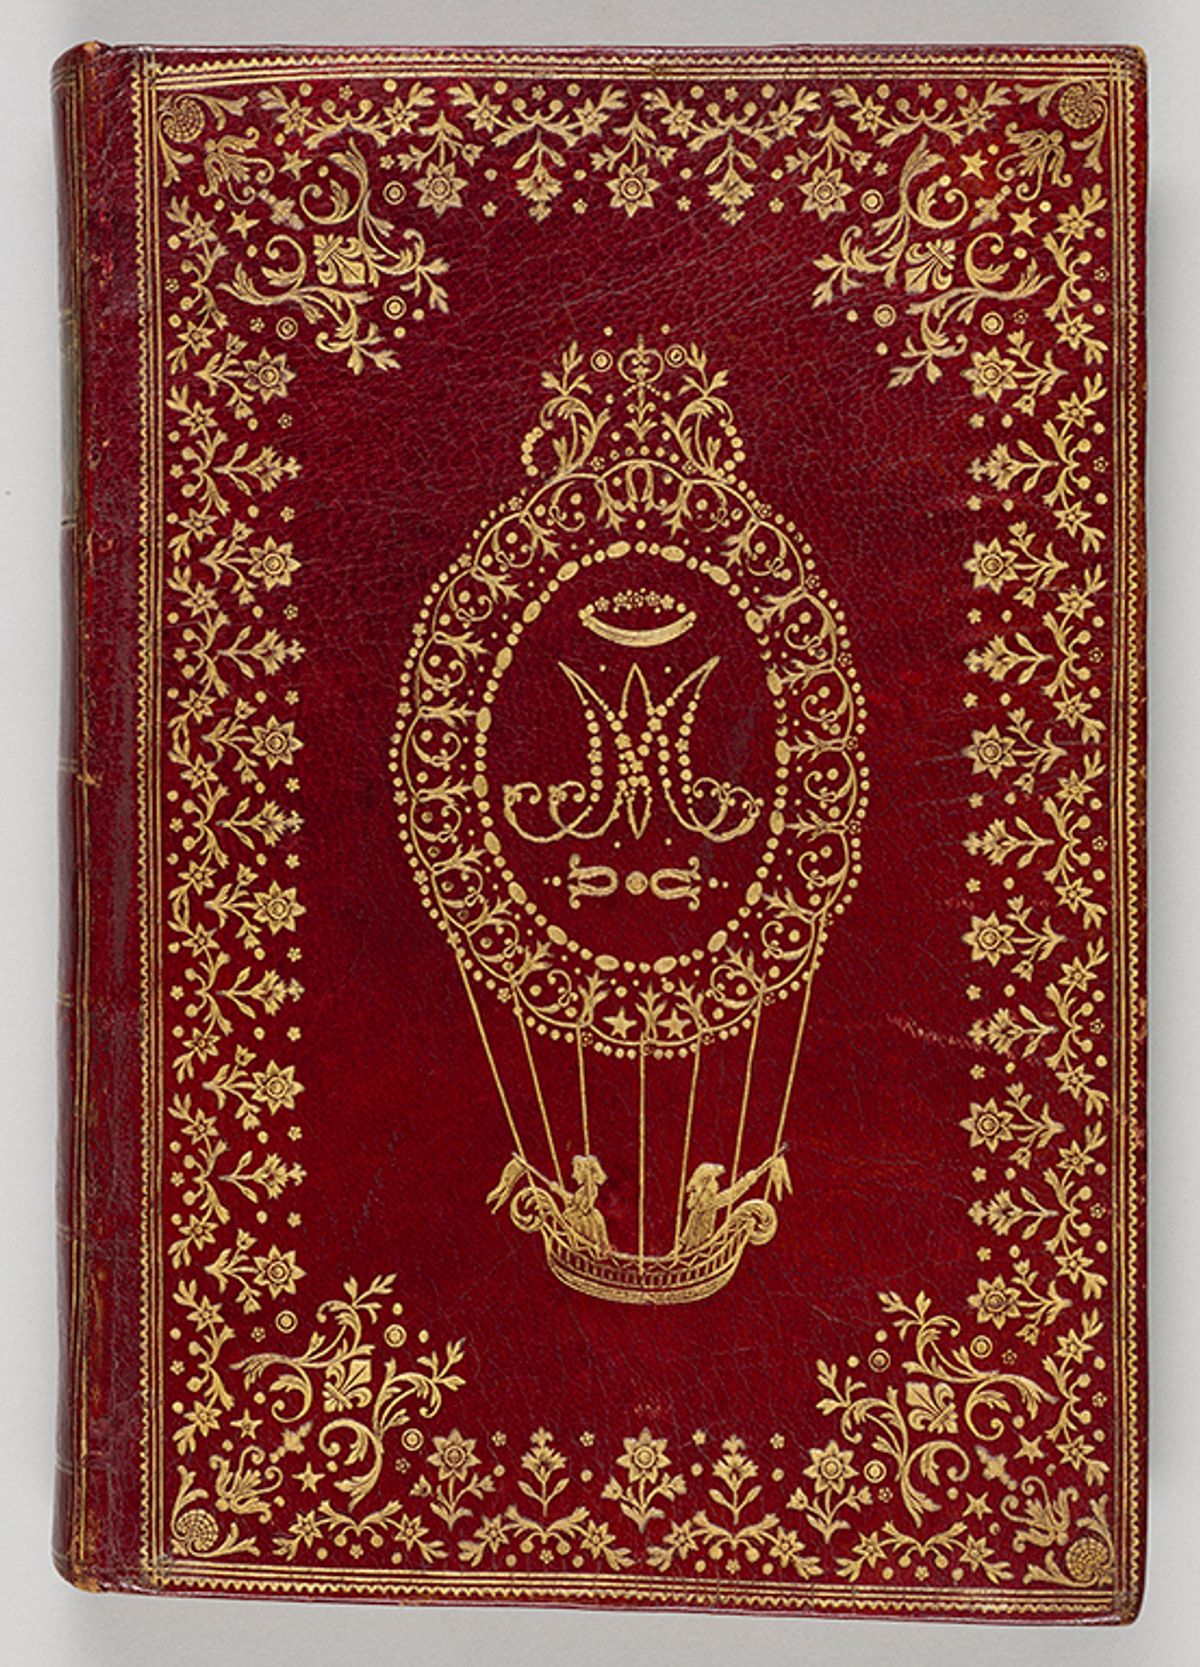 A 1782 French binding by Barthélemy Imbert (1747-1790) bequeathed by Jayne Wrightsman to the Morgan Library & Museum Janny Chiu